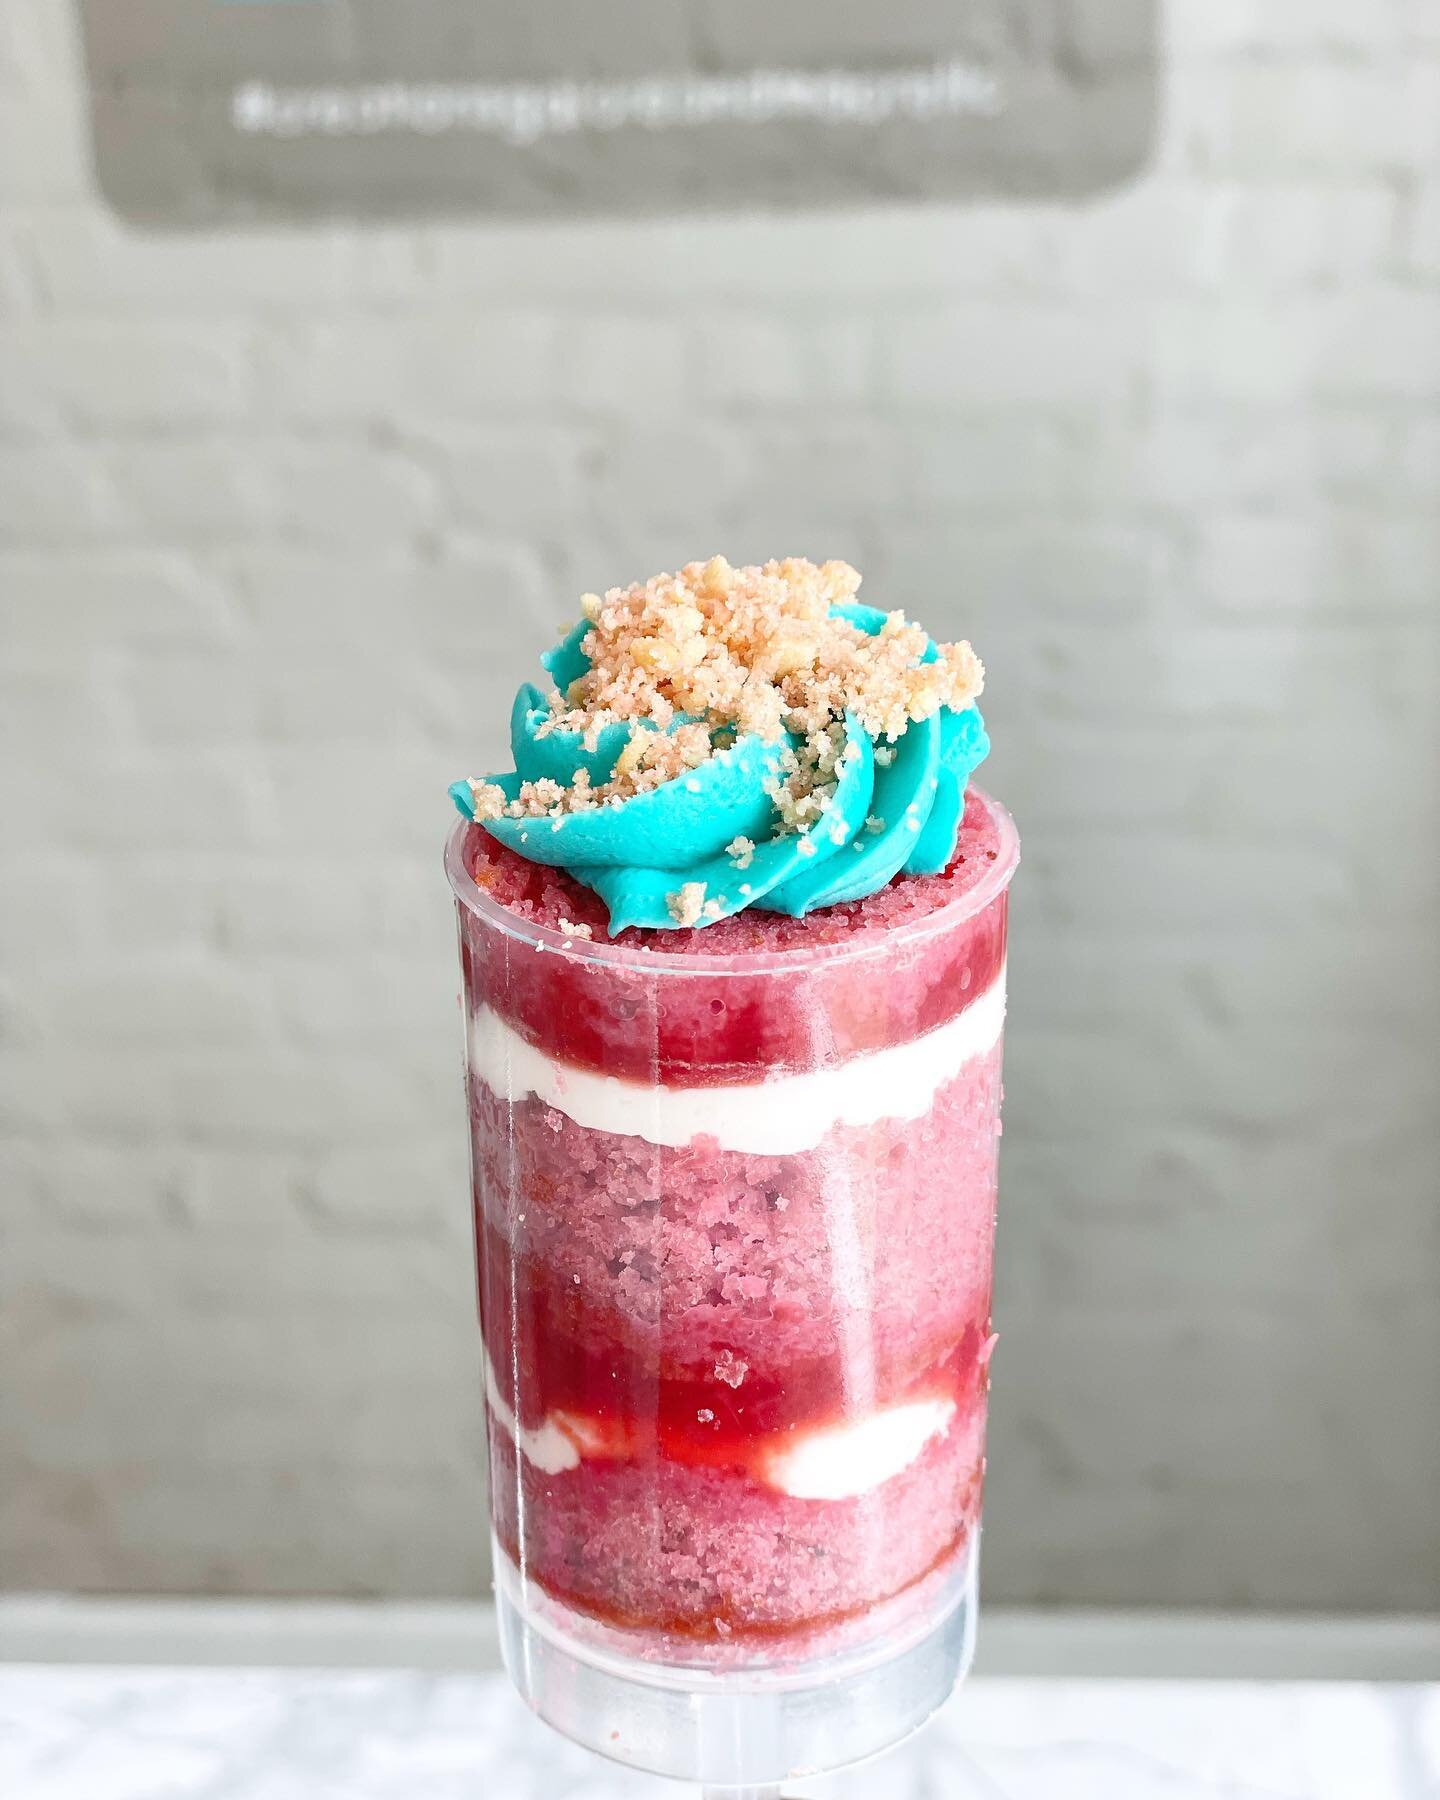 Strawberry Shortcake Push Pops! Beautifully layered strawberry cake, pur&eacute;e, vanilla buttercream with a crunch topping. My goodness!! 😋
.
.

.
📣Did you know we have a beautiful event space? 
📣 Did you know we host cake decorating classes?

W